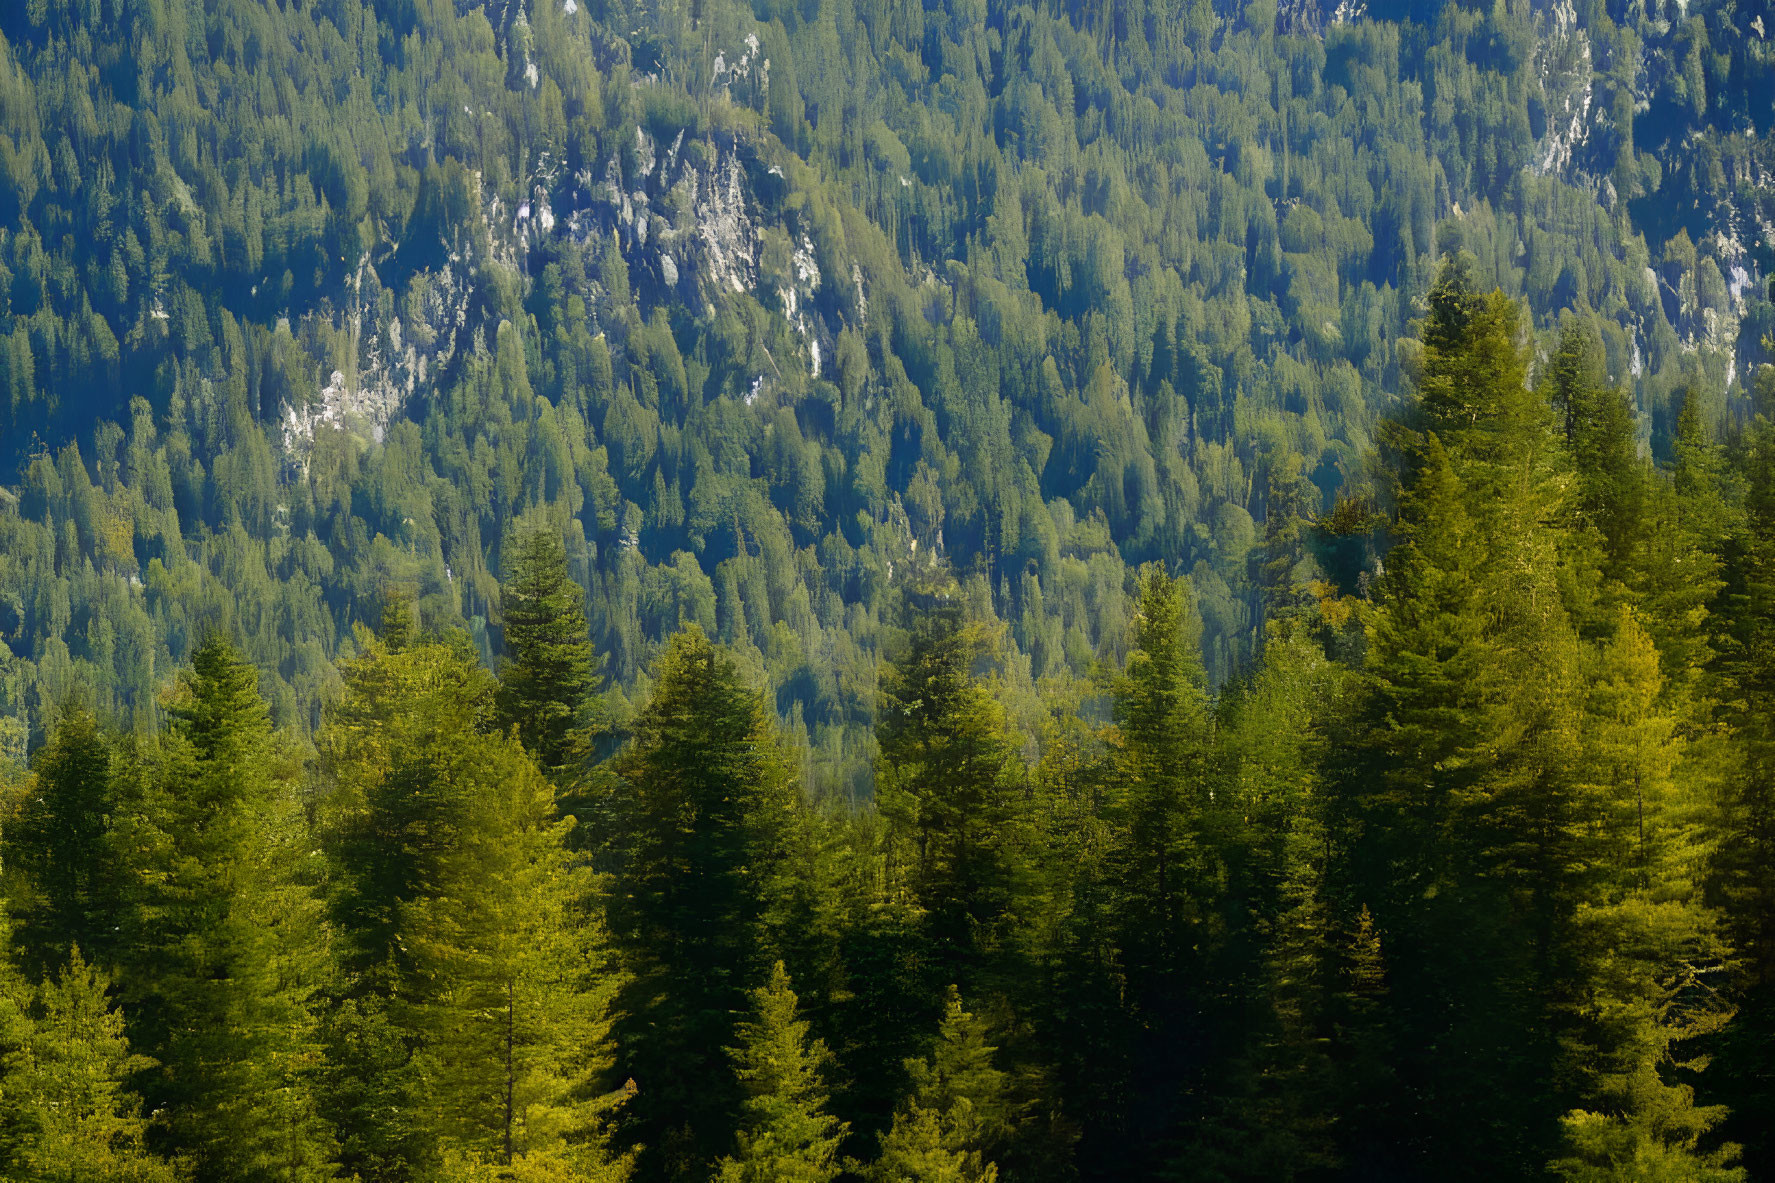 Lush forest with towering conifers and rugged mountain slope